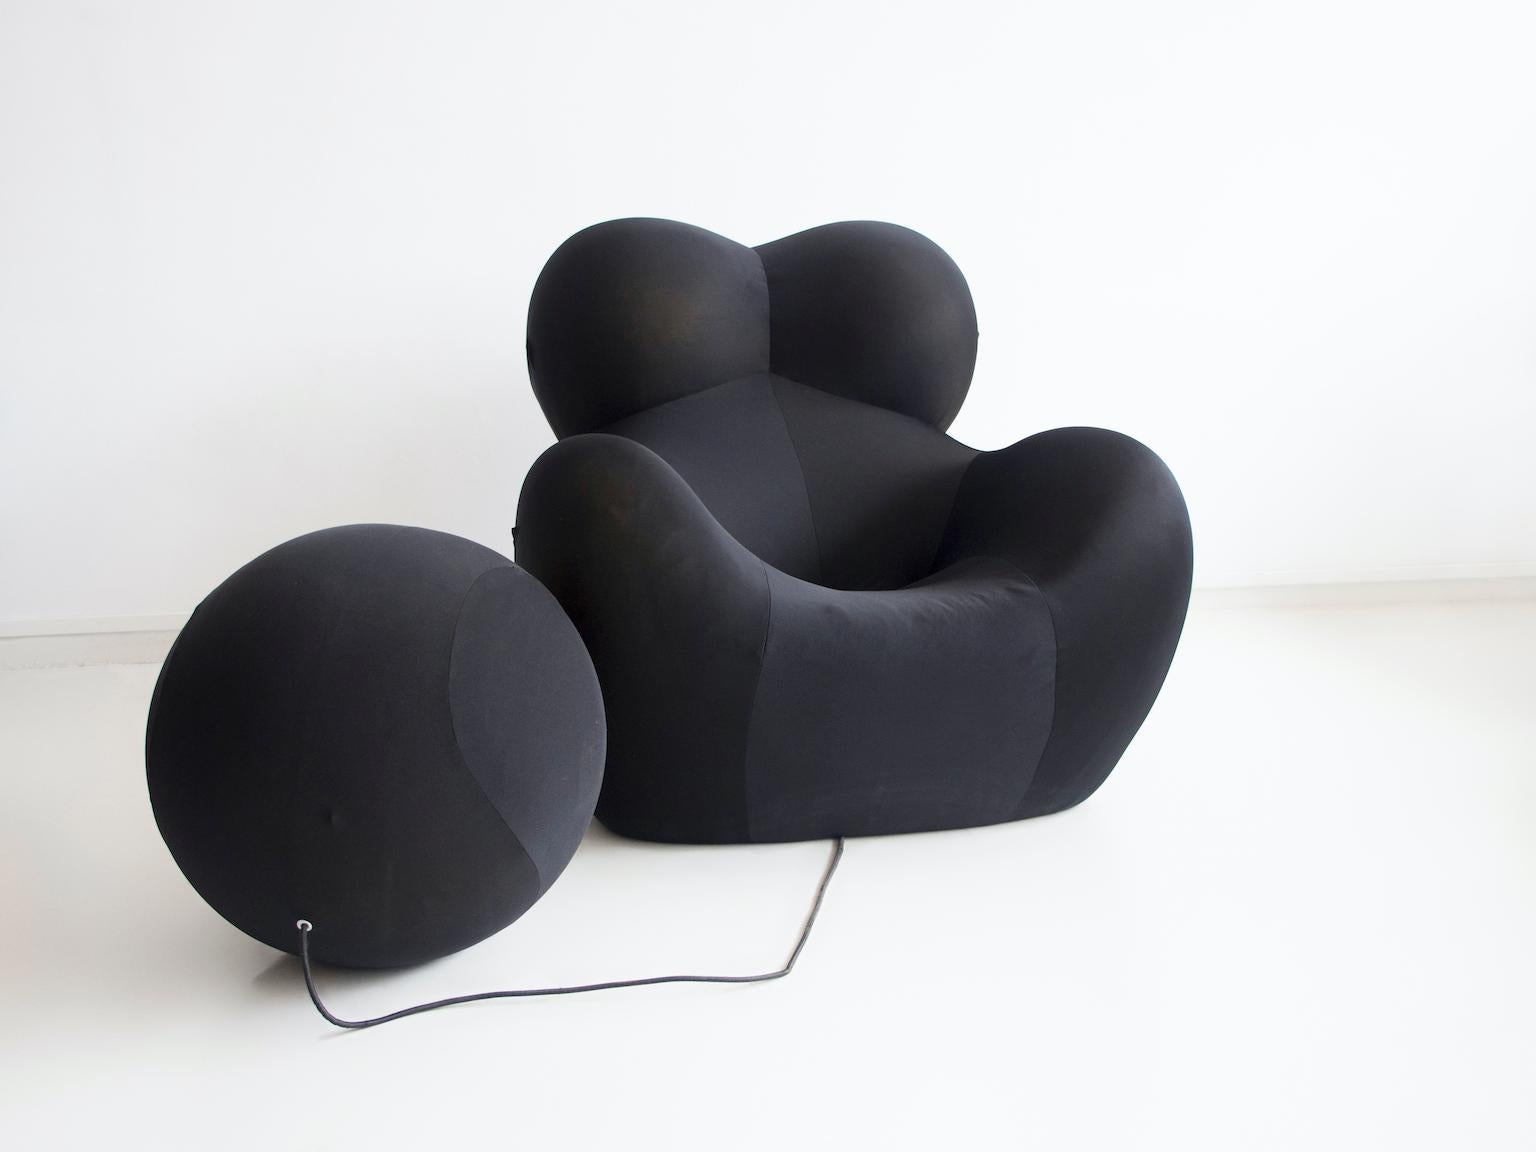 Designed by Gaetano Pesce in 1969 for a few years before being discontinued, the lounge chair and pouf Up 5, also known as big mama, blow up and donna, was reissued in 2000 by B&B Italia. 

The lounge chair Up 5 comes with the Up 6 pouf, which